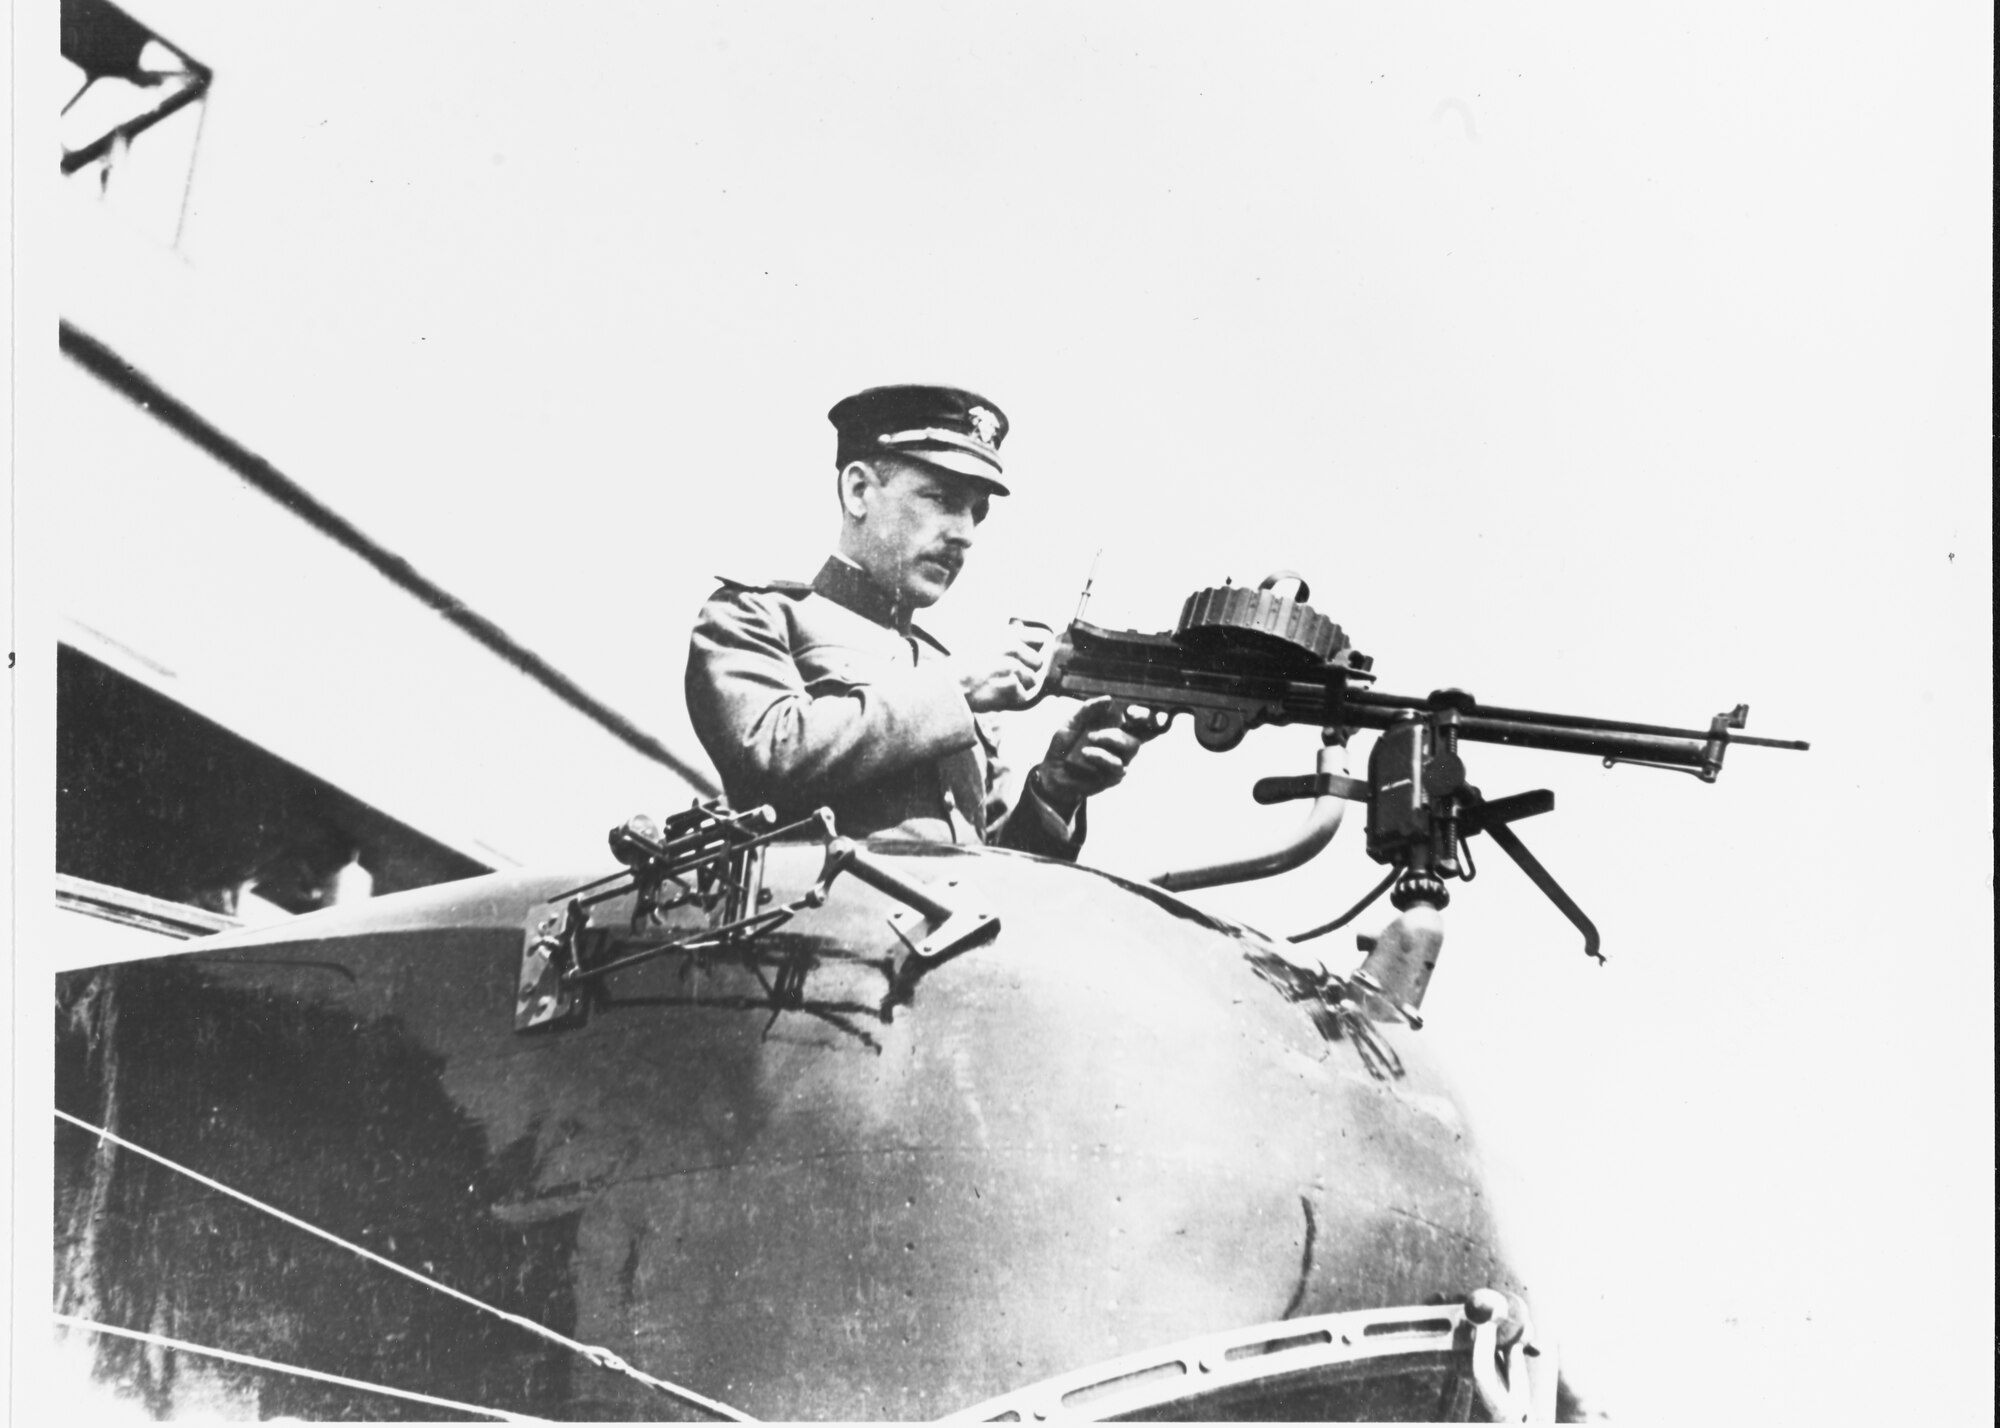 Navy Lt. Arthur E.J. Male, USNRF, in gunner's bow position, with a Lewis aircraft machine gun, at the Naval Aircraft Factory, Philadelphia, Pennsylvania, 25 March 1918. Note bomb sight on the plane's side, beside the gunner. (Photo courtesy Naval History and Heritage Command)